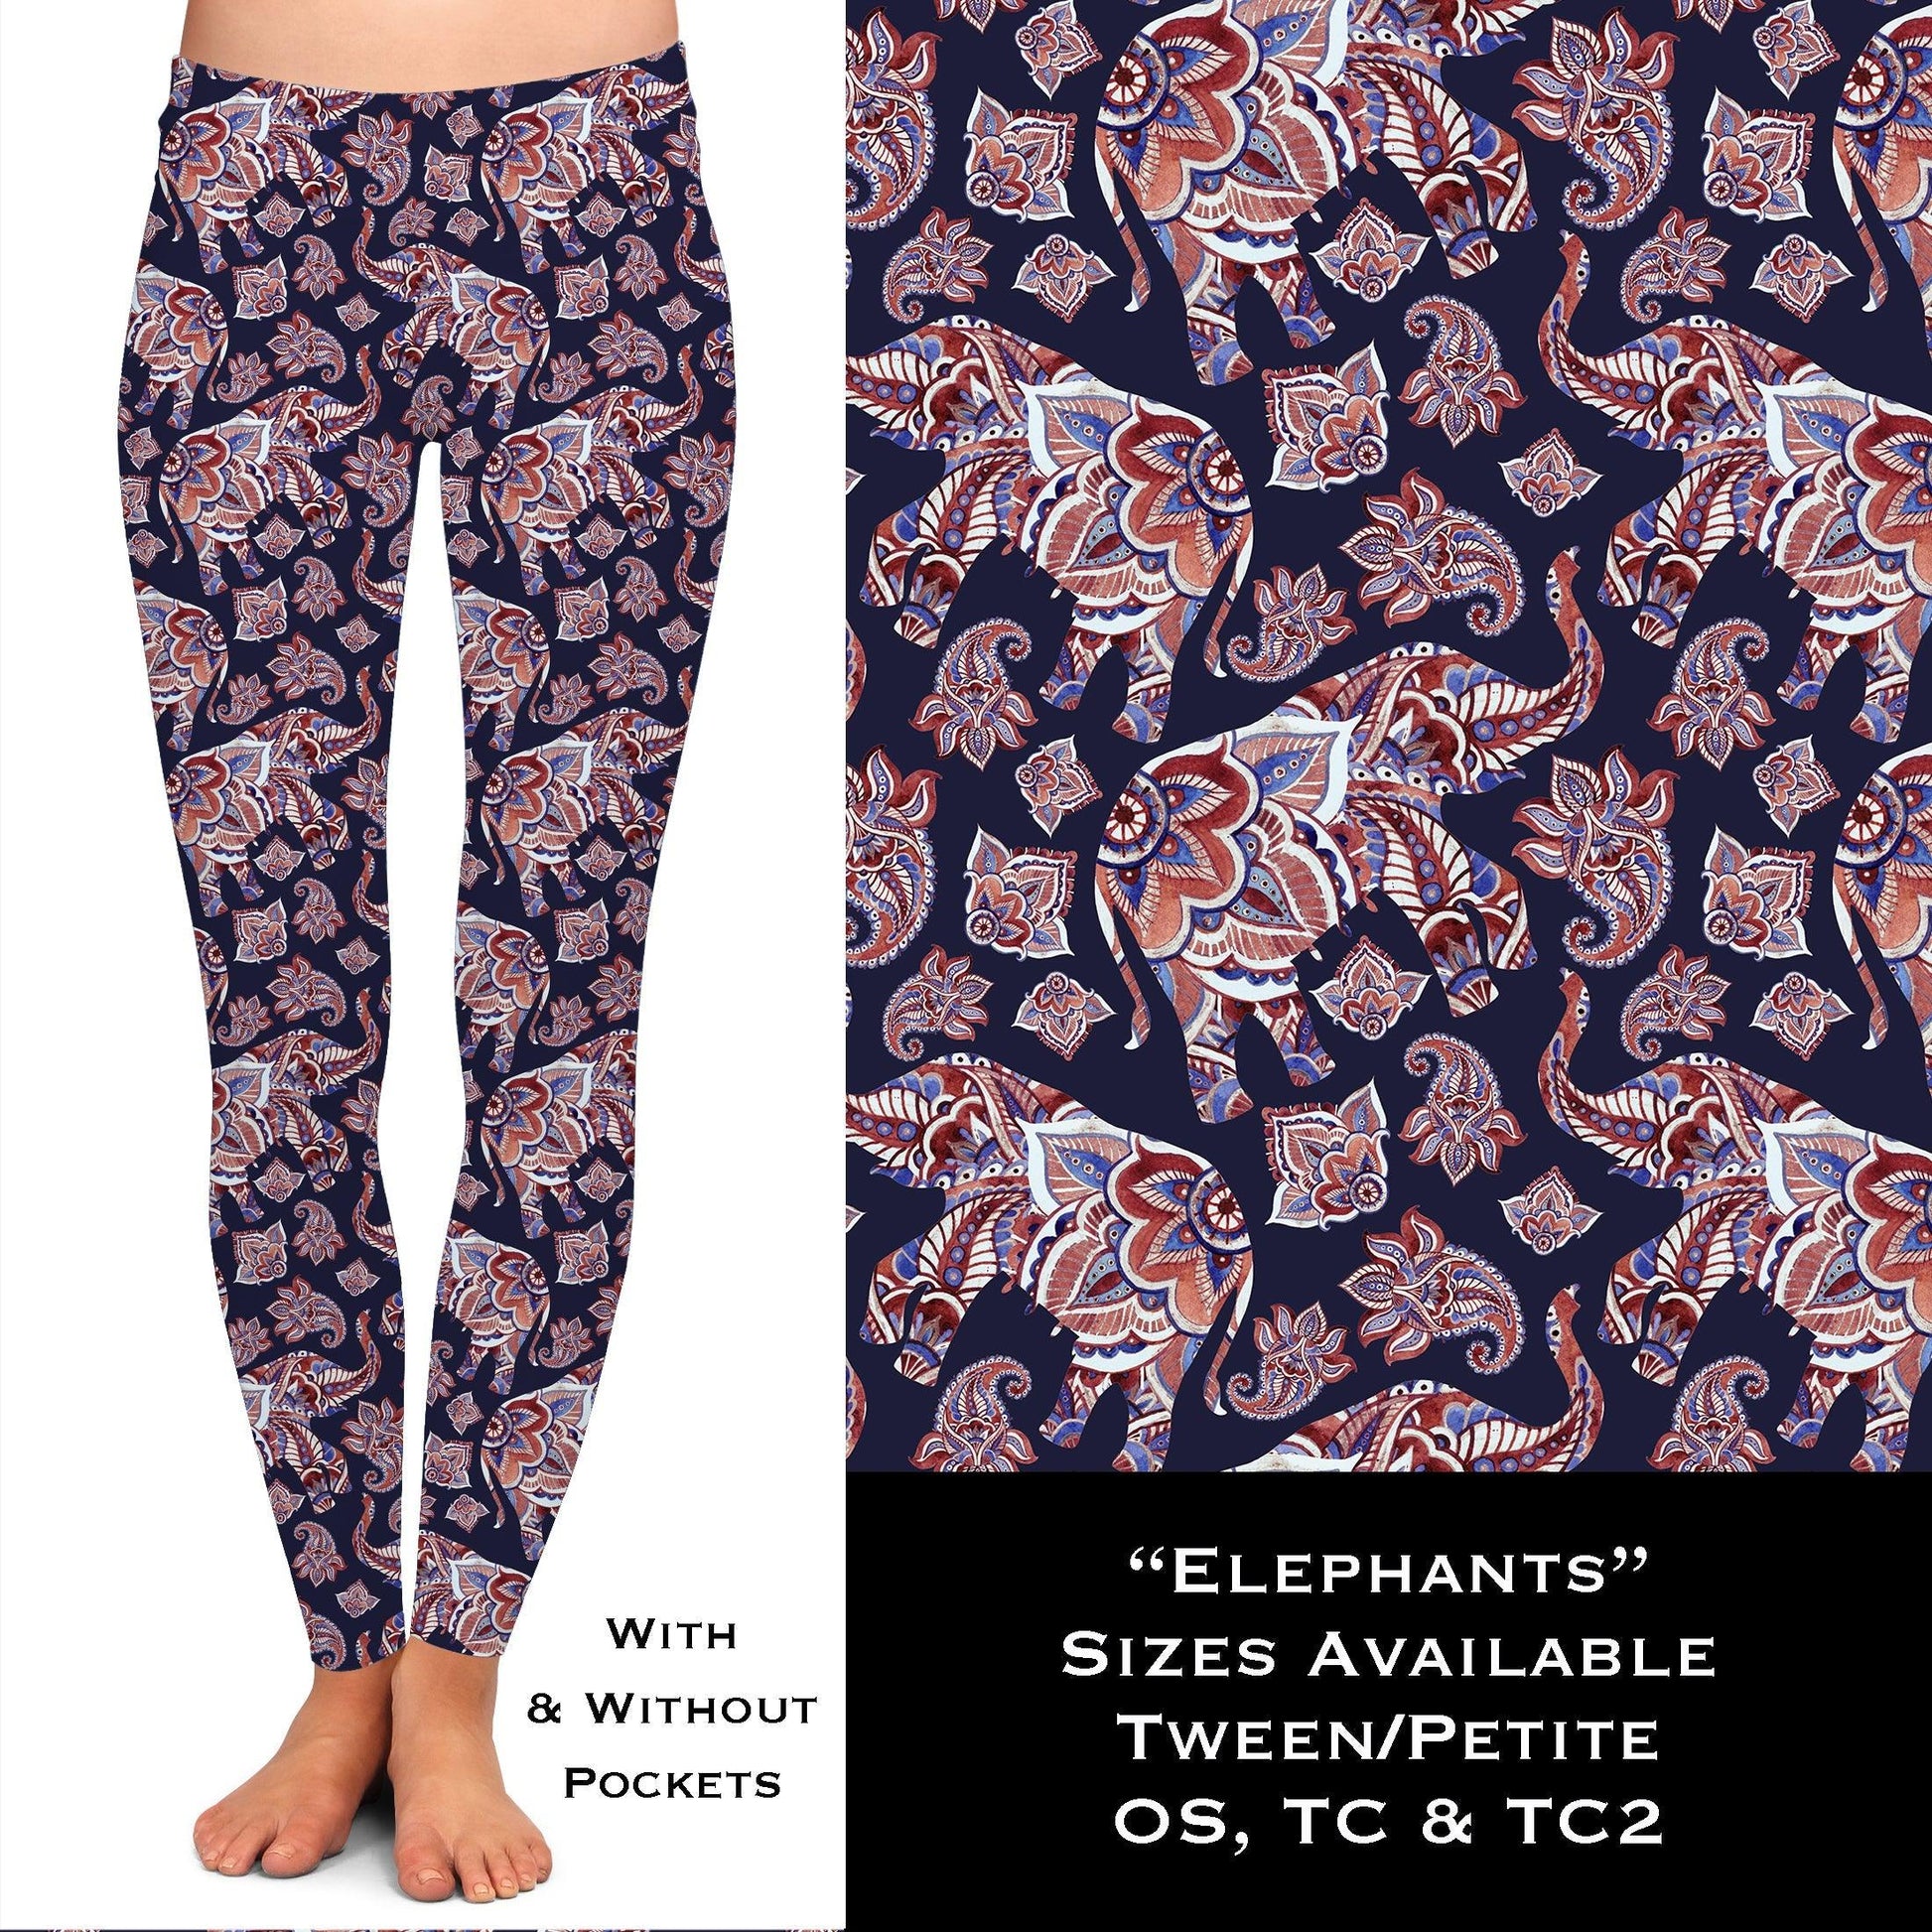 Elephants - Leggings with Pockets - That’s So Fletch Boutique 